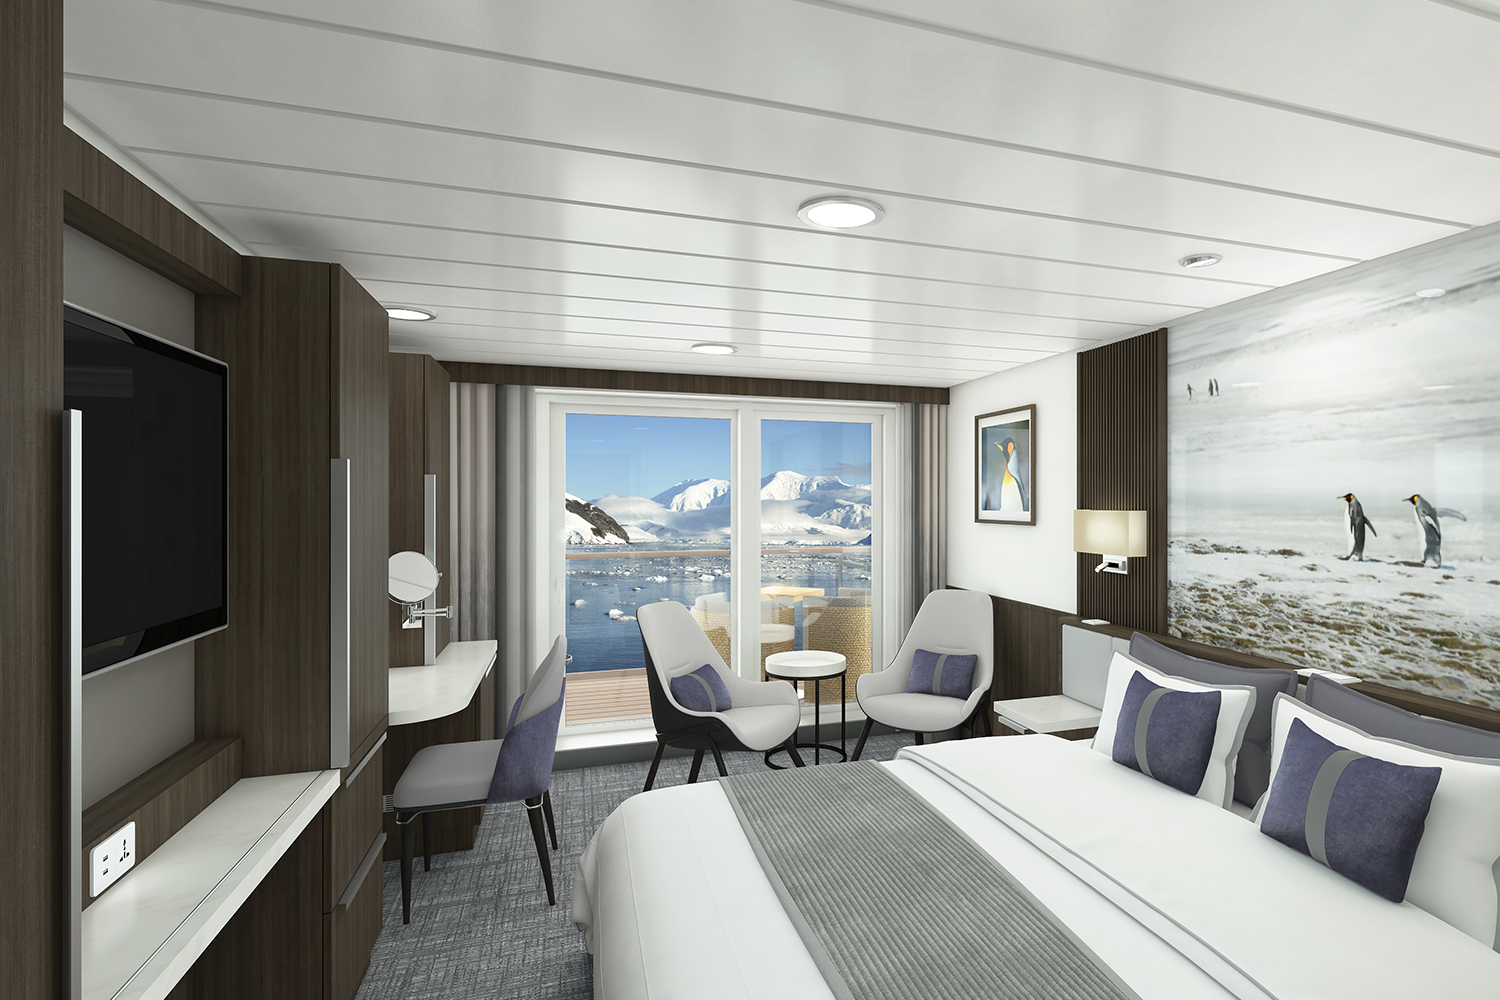 One of the cabins onboard the Sylvia Earle ship from Aurora Expeditions